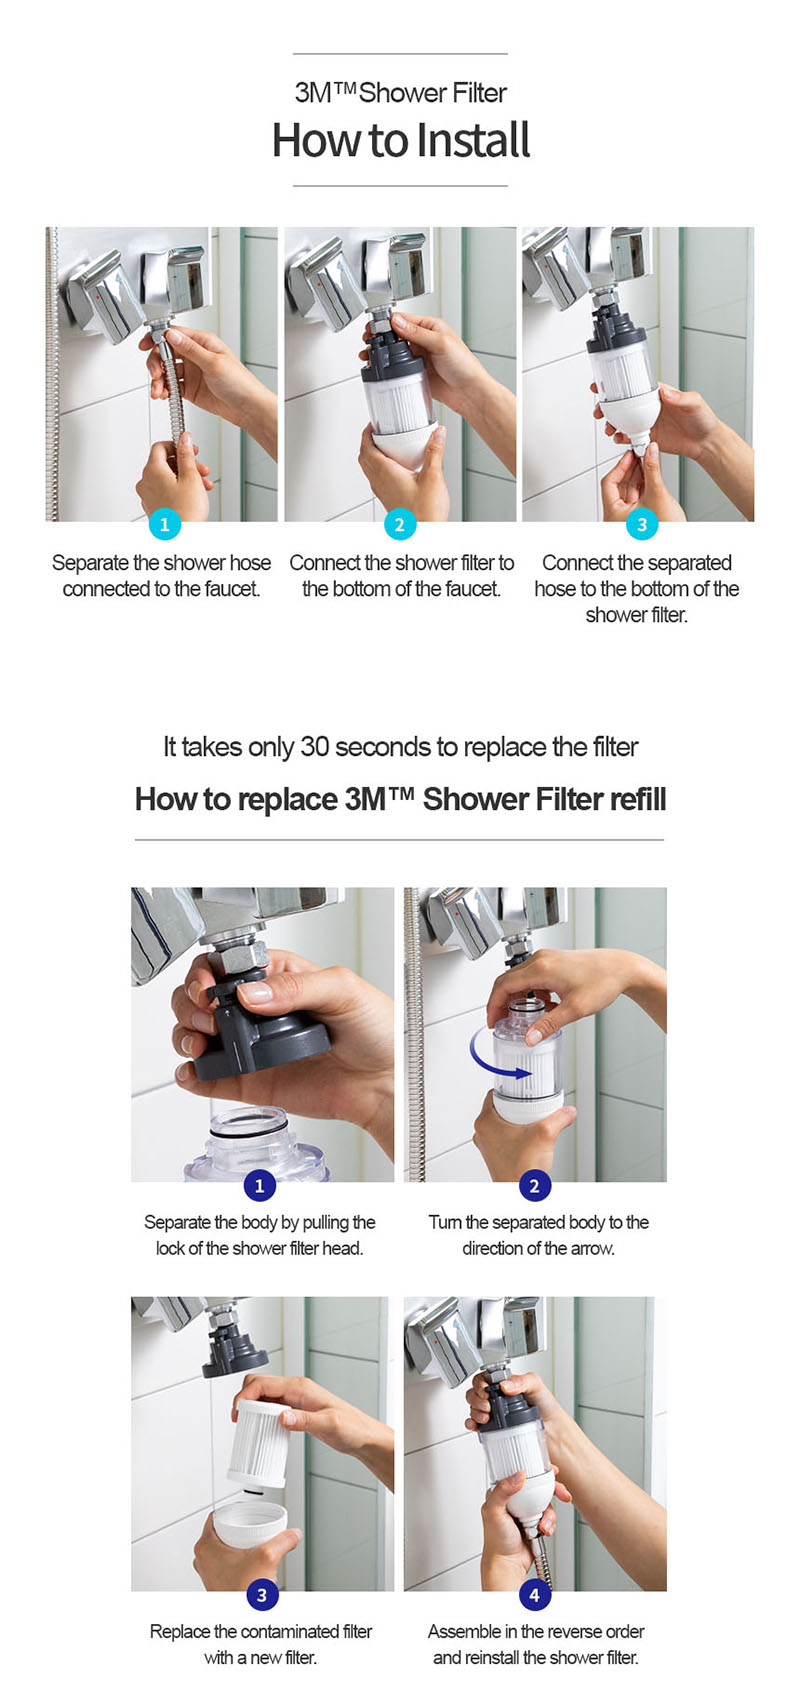 3M HSF-IS Premium Shower Filter Purifying Safe Shower Water Healthy Skin - Điện máy HAPA